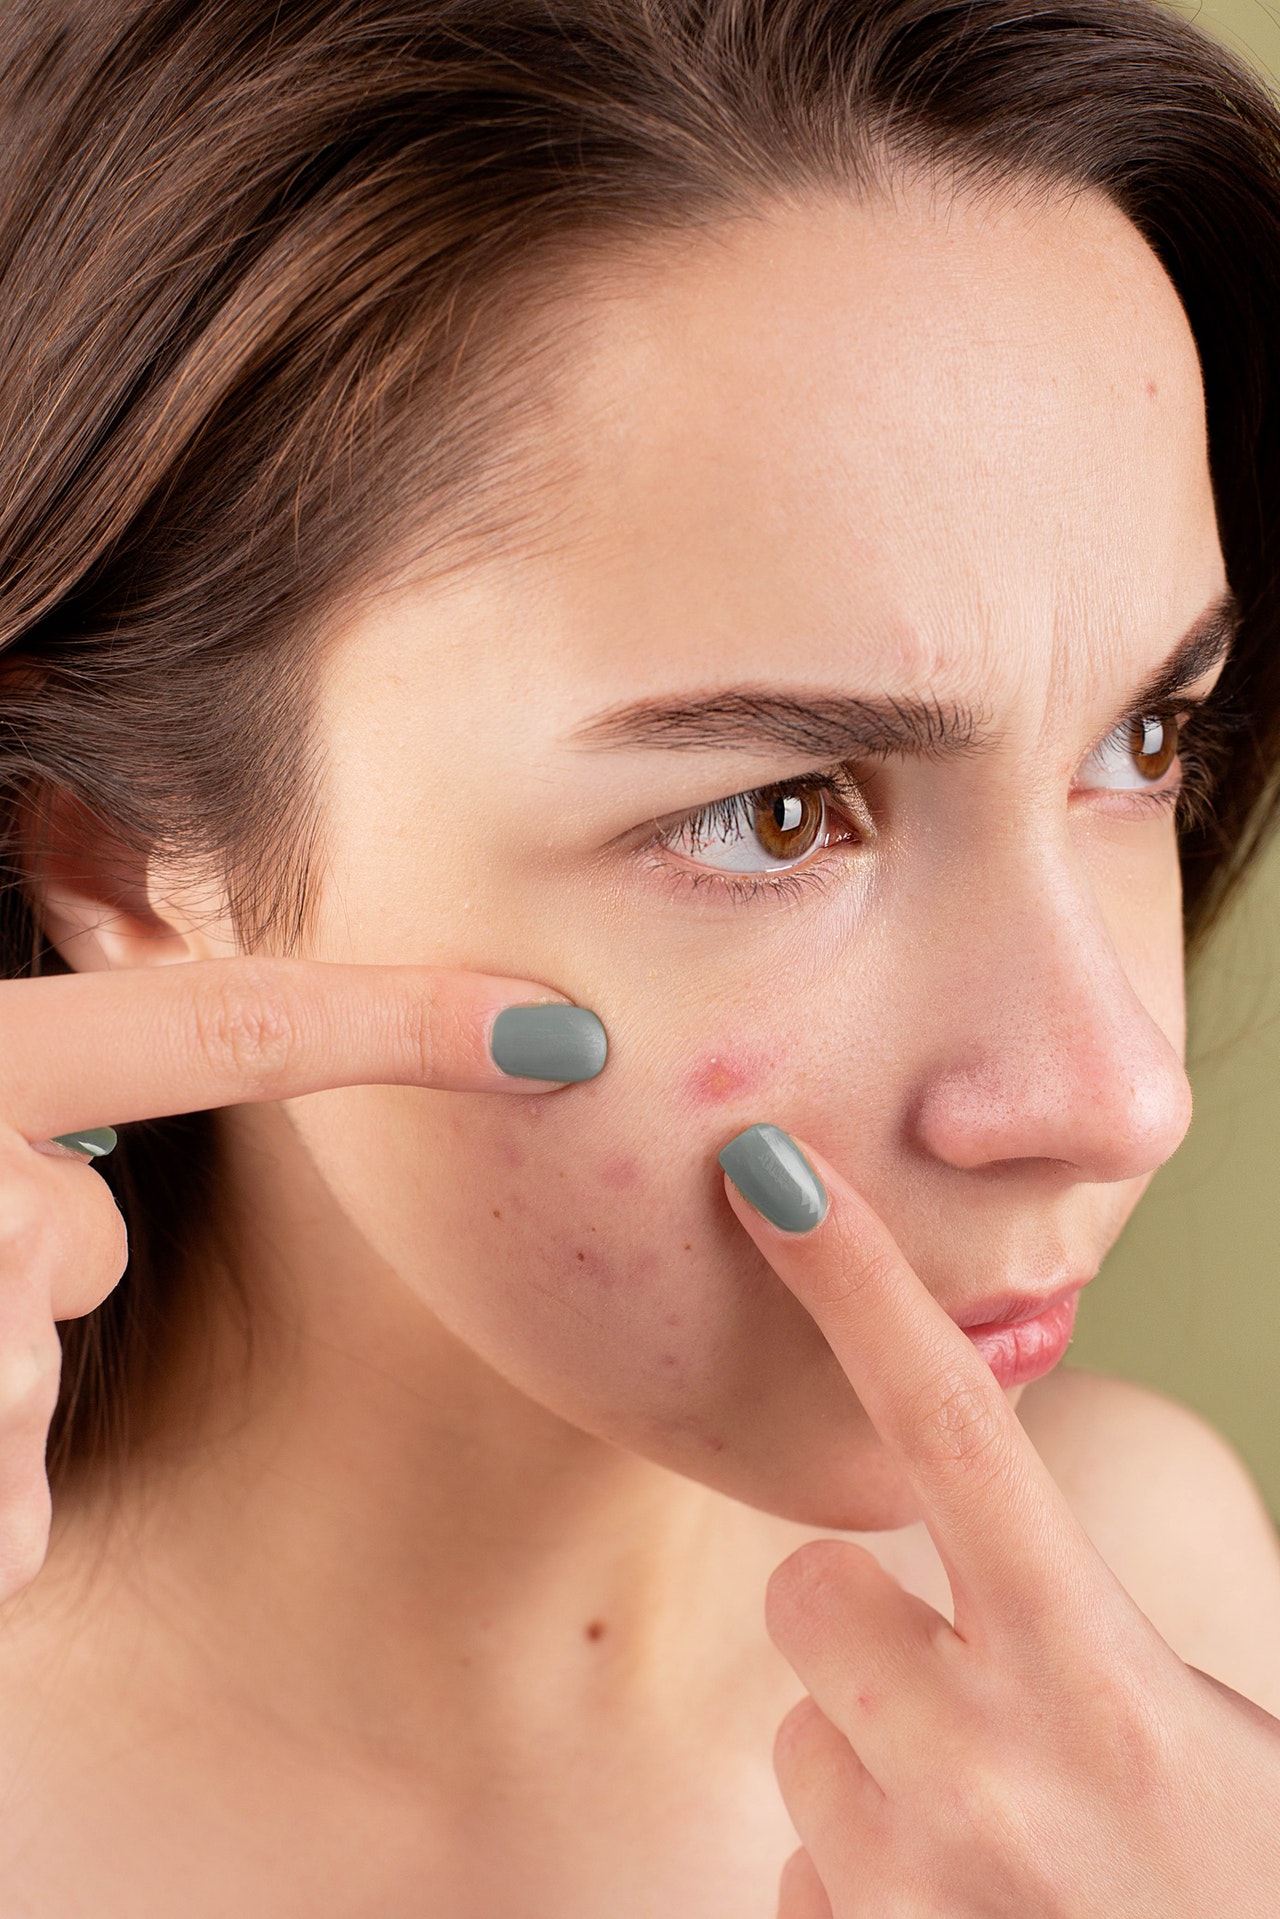 Woman Squeezing Pimples